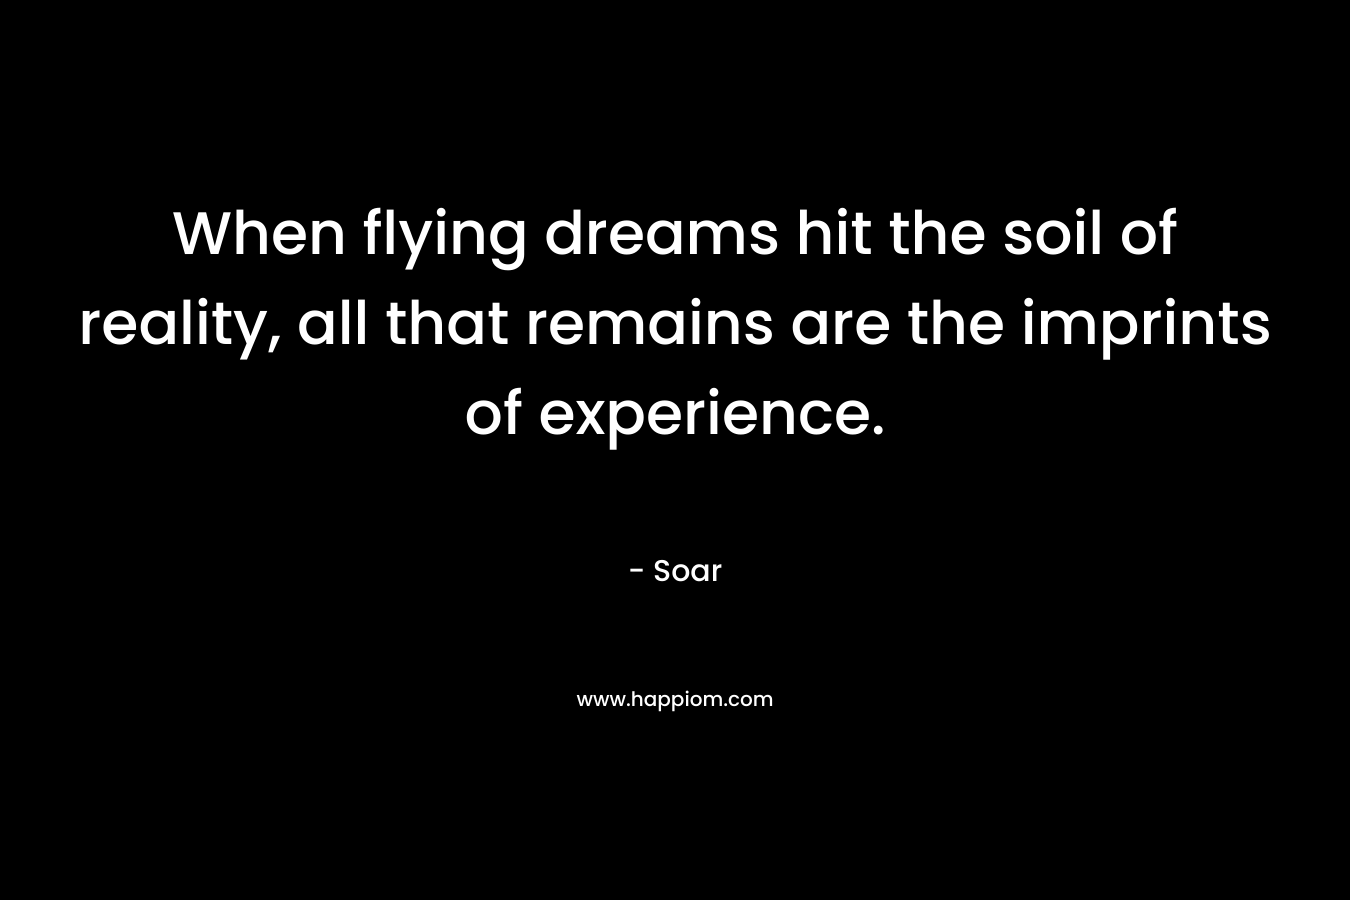 When flying dreams hit the soil of reality, all that remains are the imprints of experience. – Soar